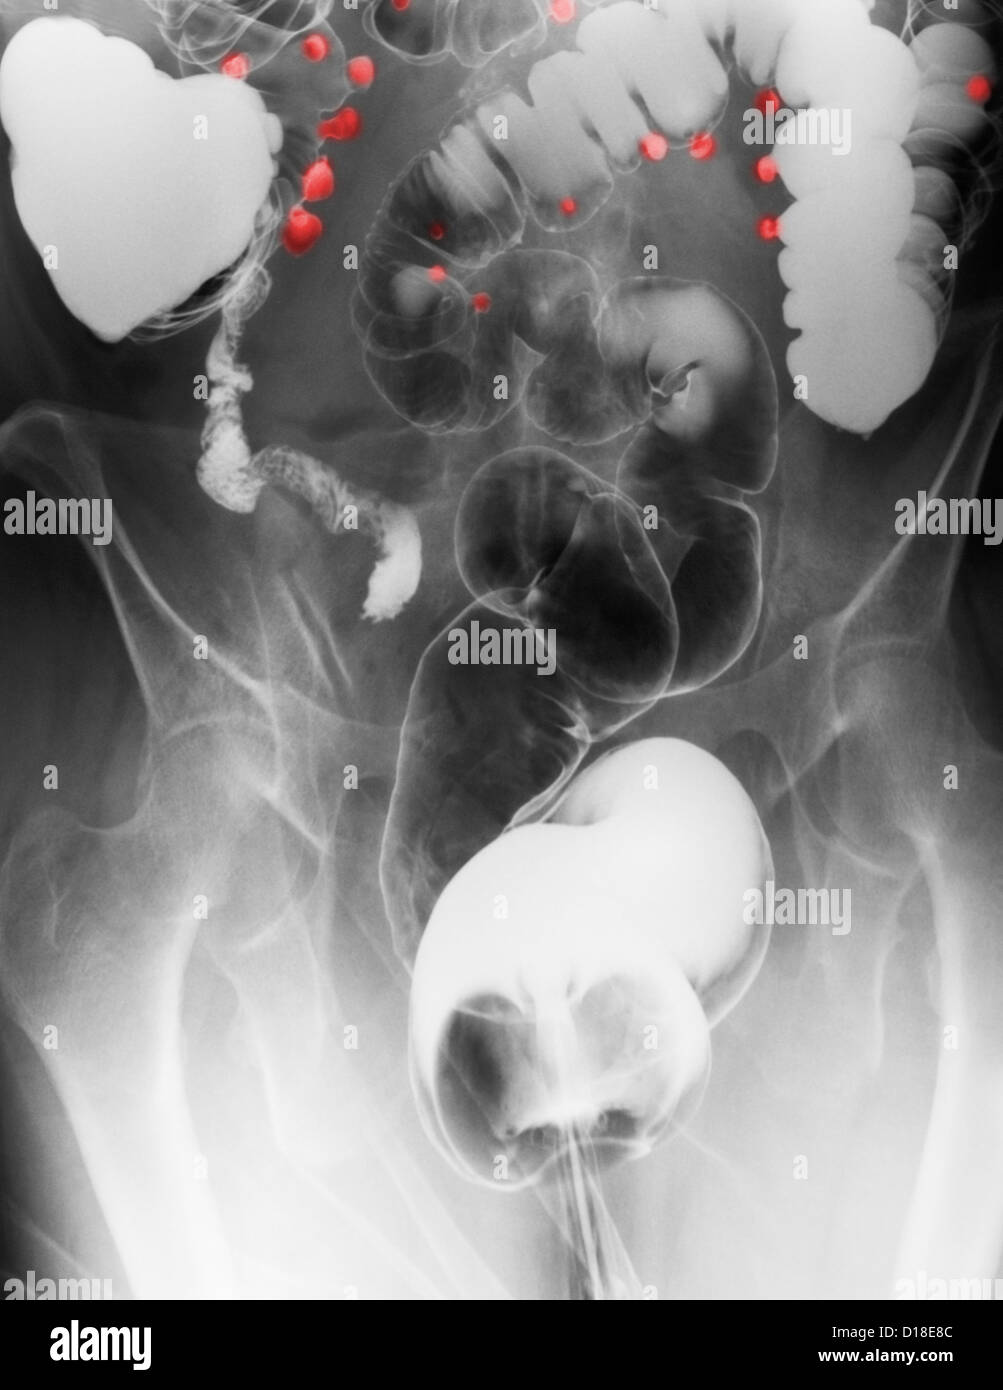 barium contrast X-ray, diverticulosis in the colon Stock Photo